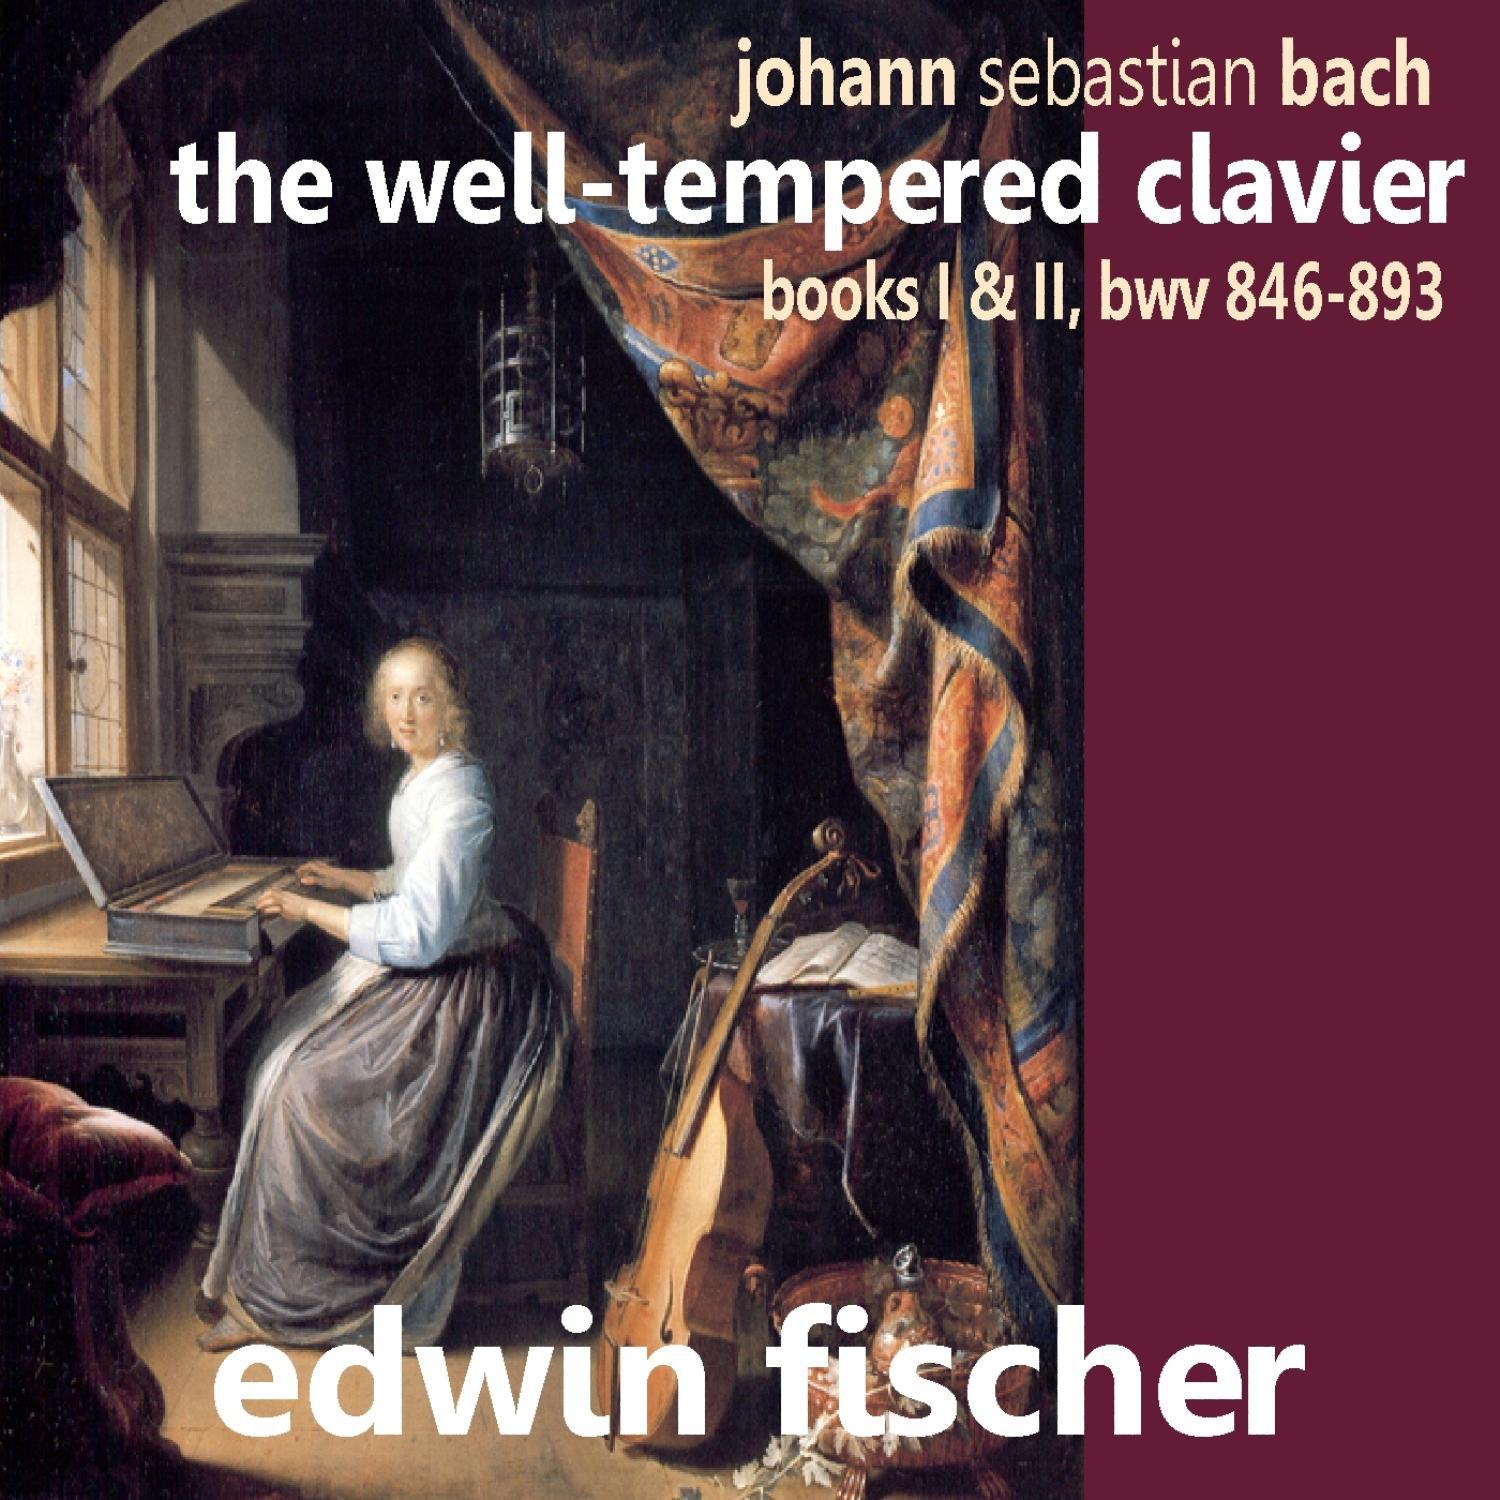 Book II, Prelude and Fugue No. 19 in A Major, BWV 888